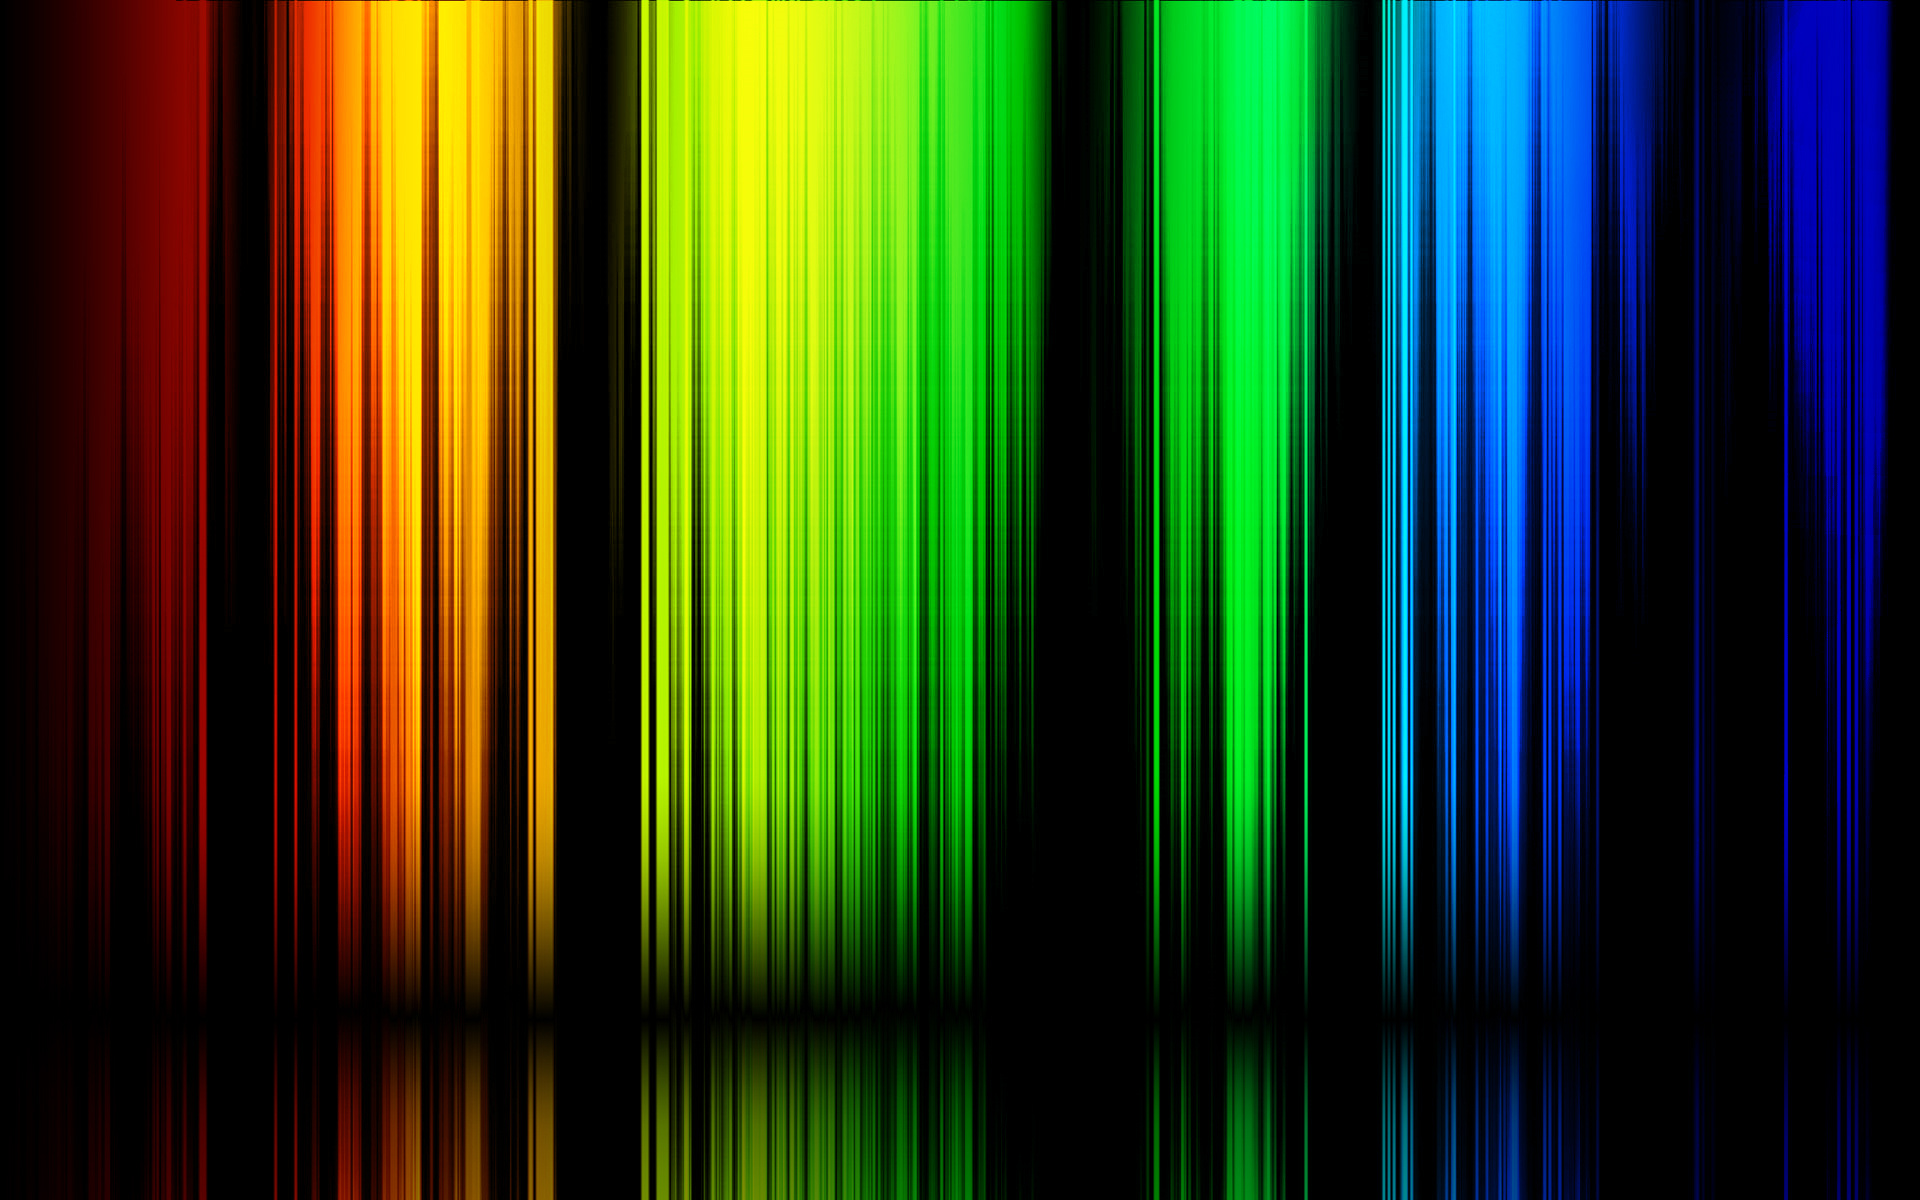 Colors wallpaper, Colorful backgrounds, Striking and vibrant, Visual burst of colors, 1920x1200 HD Desktop